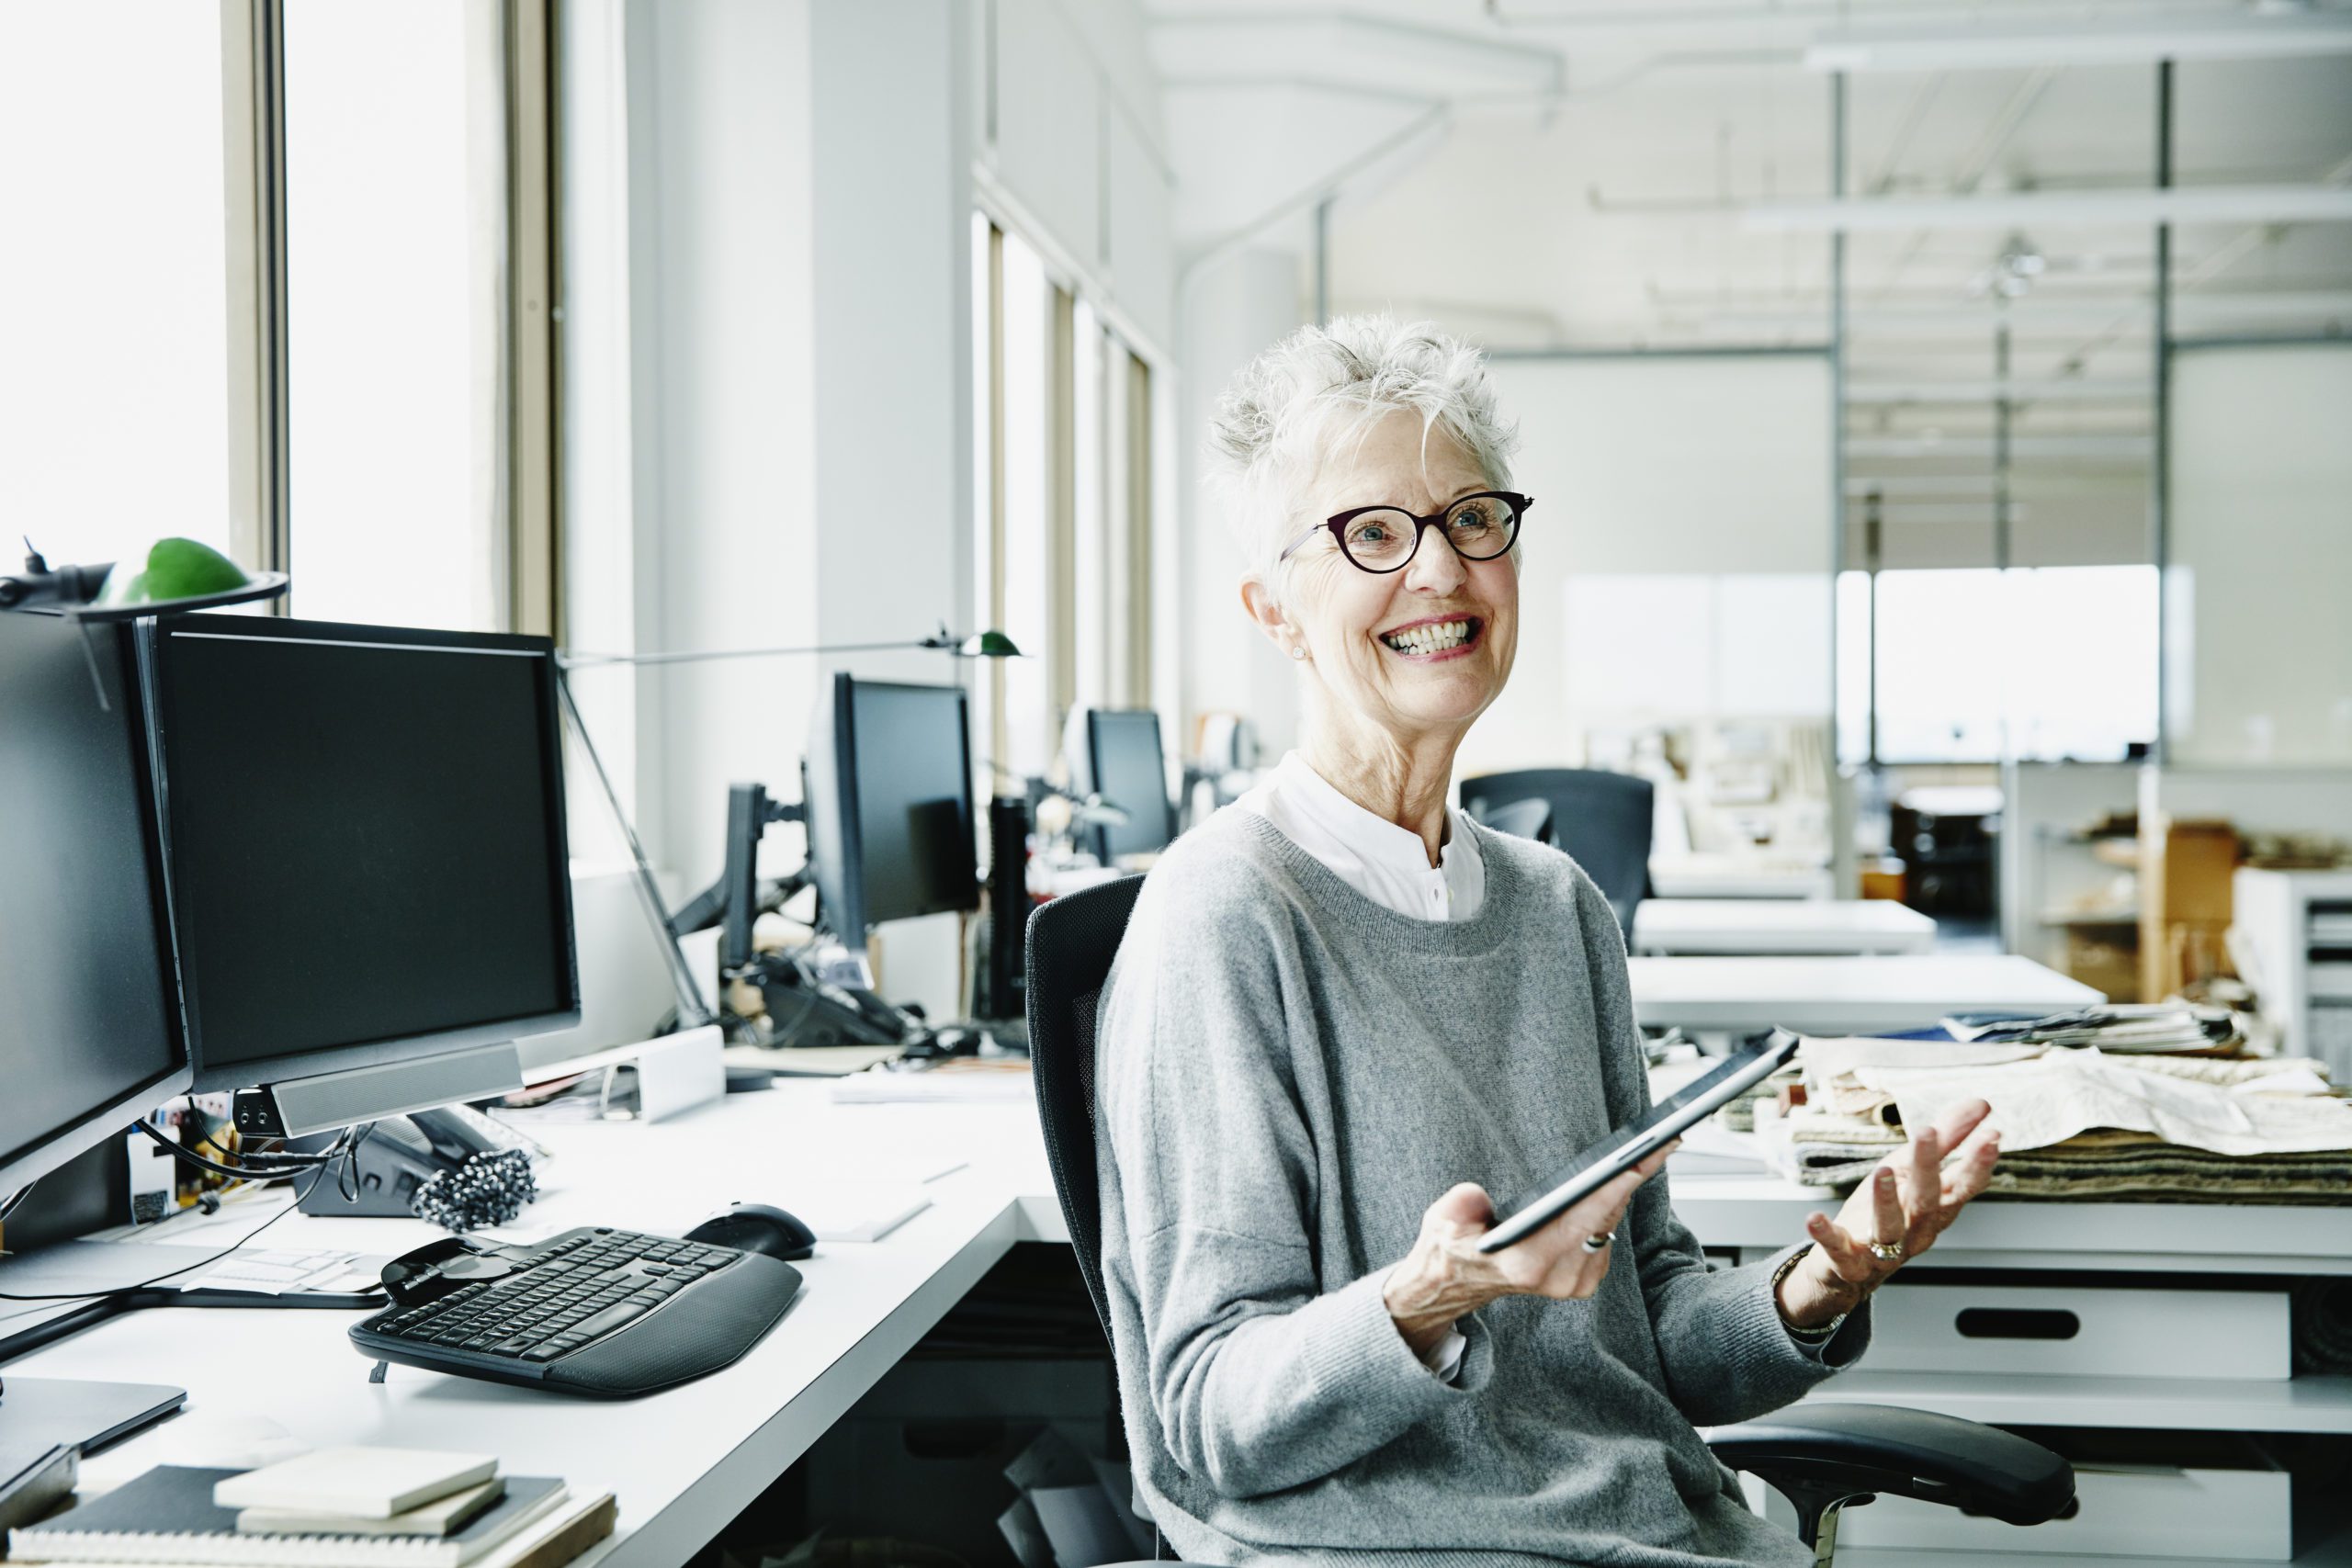 Defying ageism in the workplace